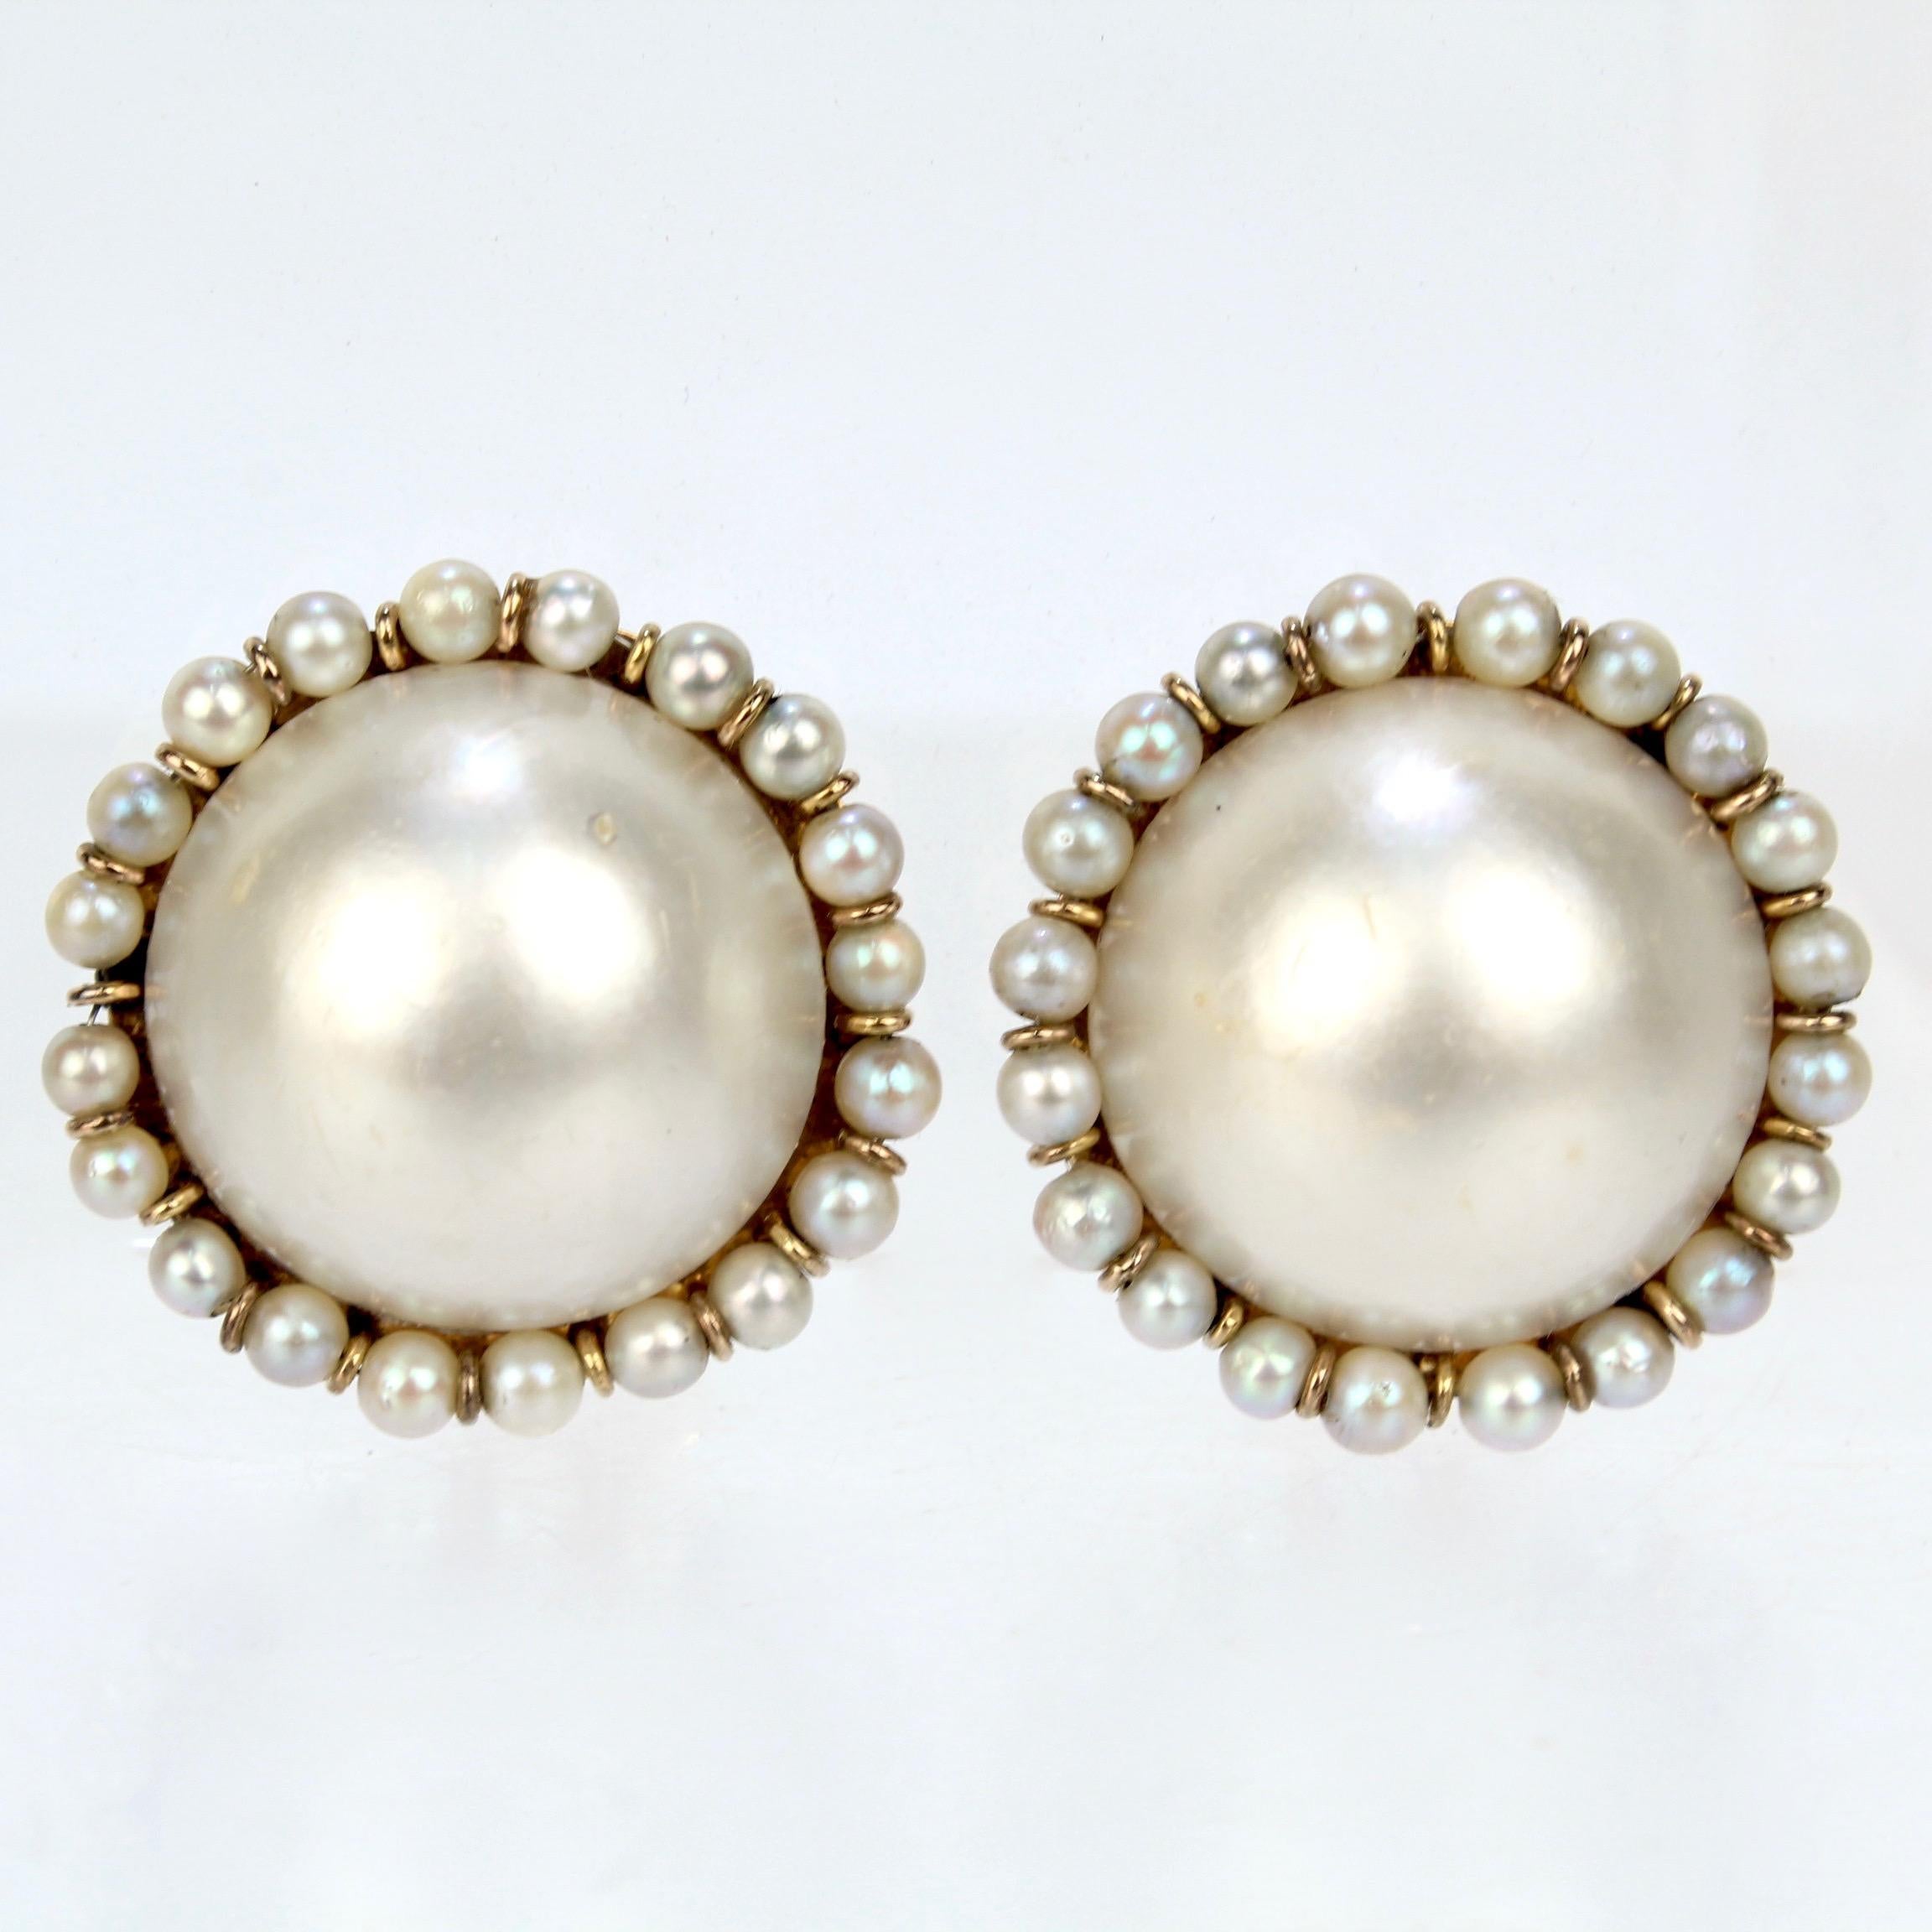 A wonderful pair of gold and mabe pearl earrings.

With large mabe pearls center set and framed by small round pearls on a 14k gold mount with a snowflake pattern to the reverse.

Th clips are marked 14K for gold fineness.

Simply a wonderful pair